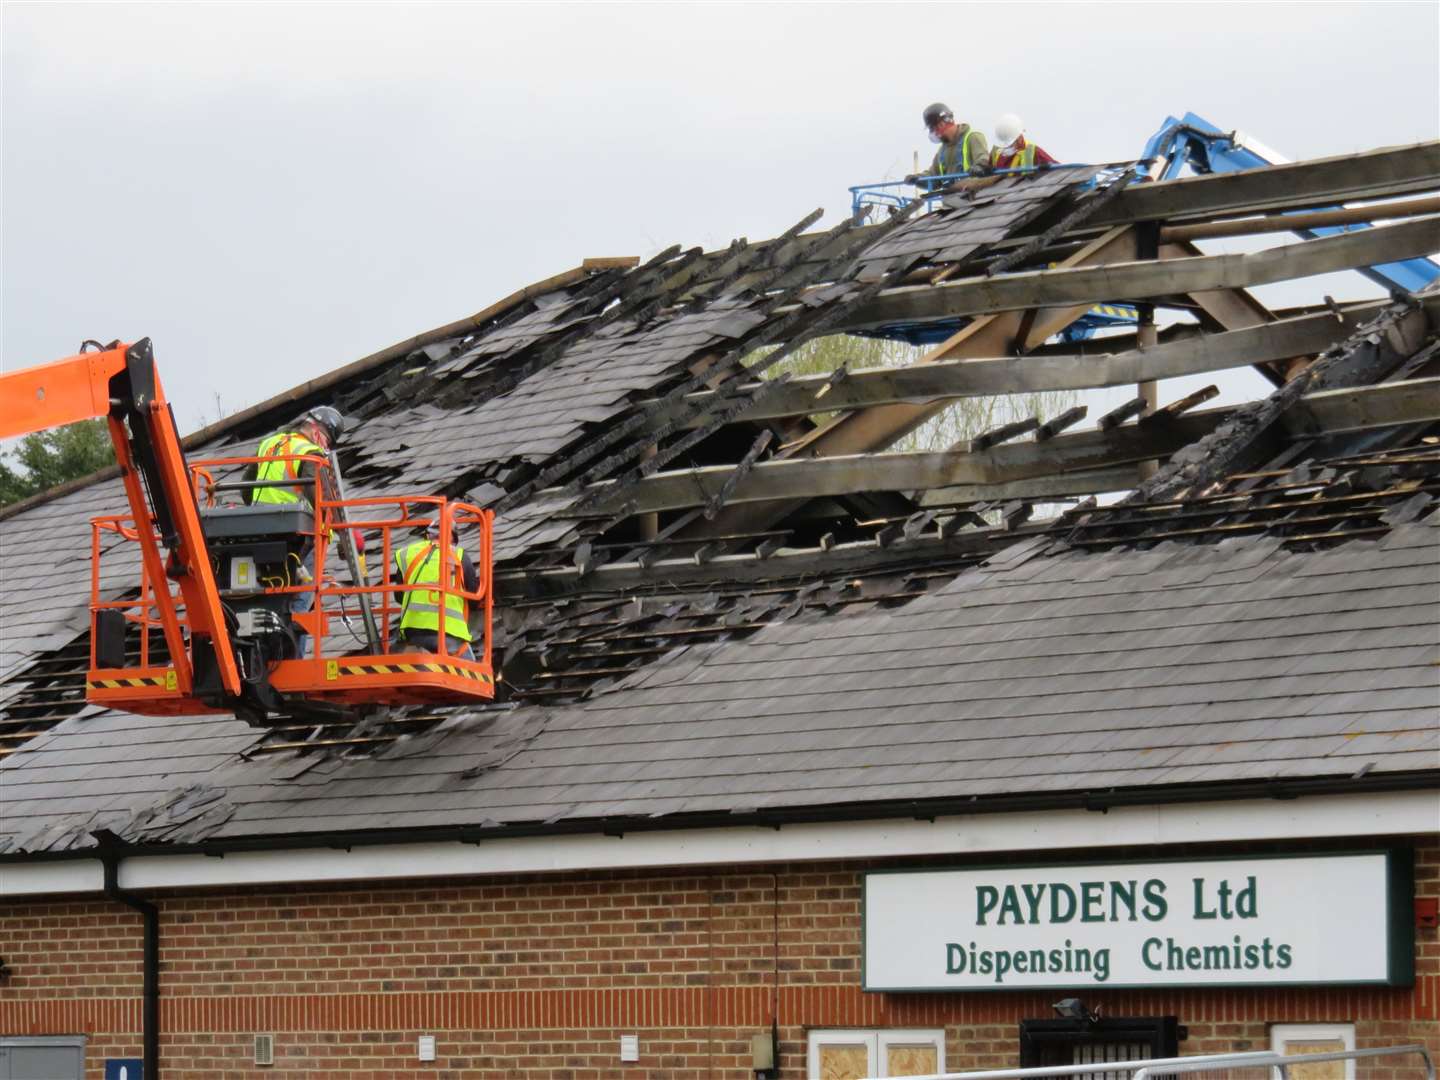 A giant cherry picker was used to bring down the wrecked roof Picture: Andy Clark